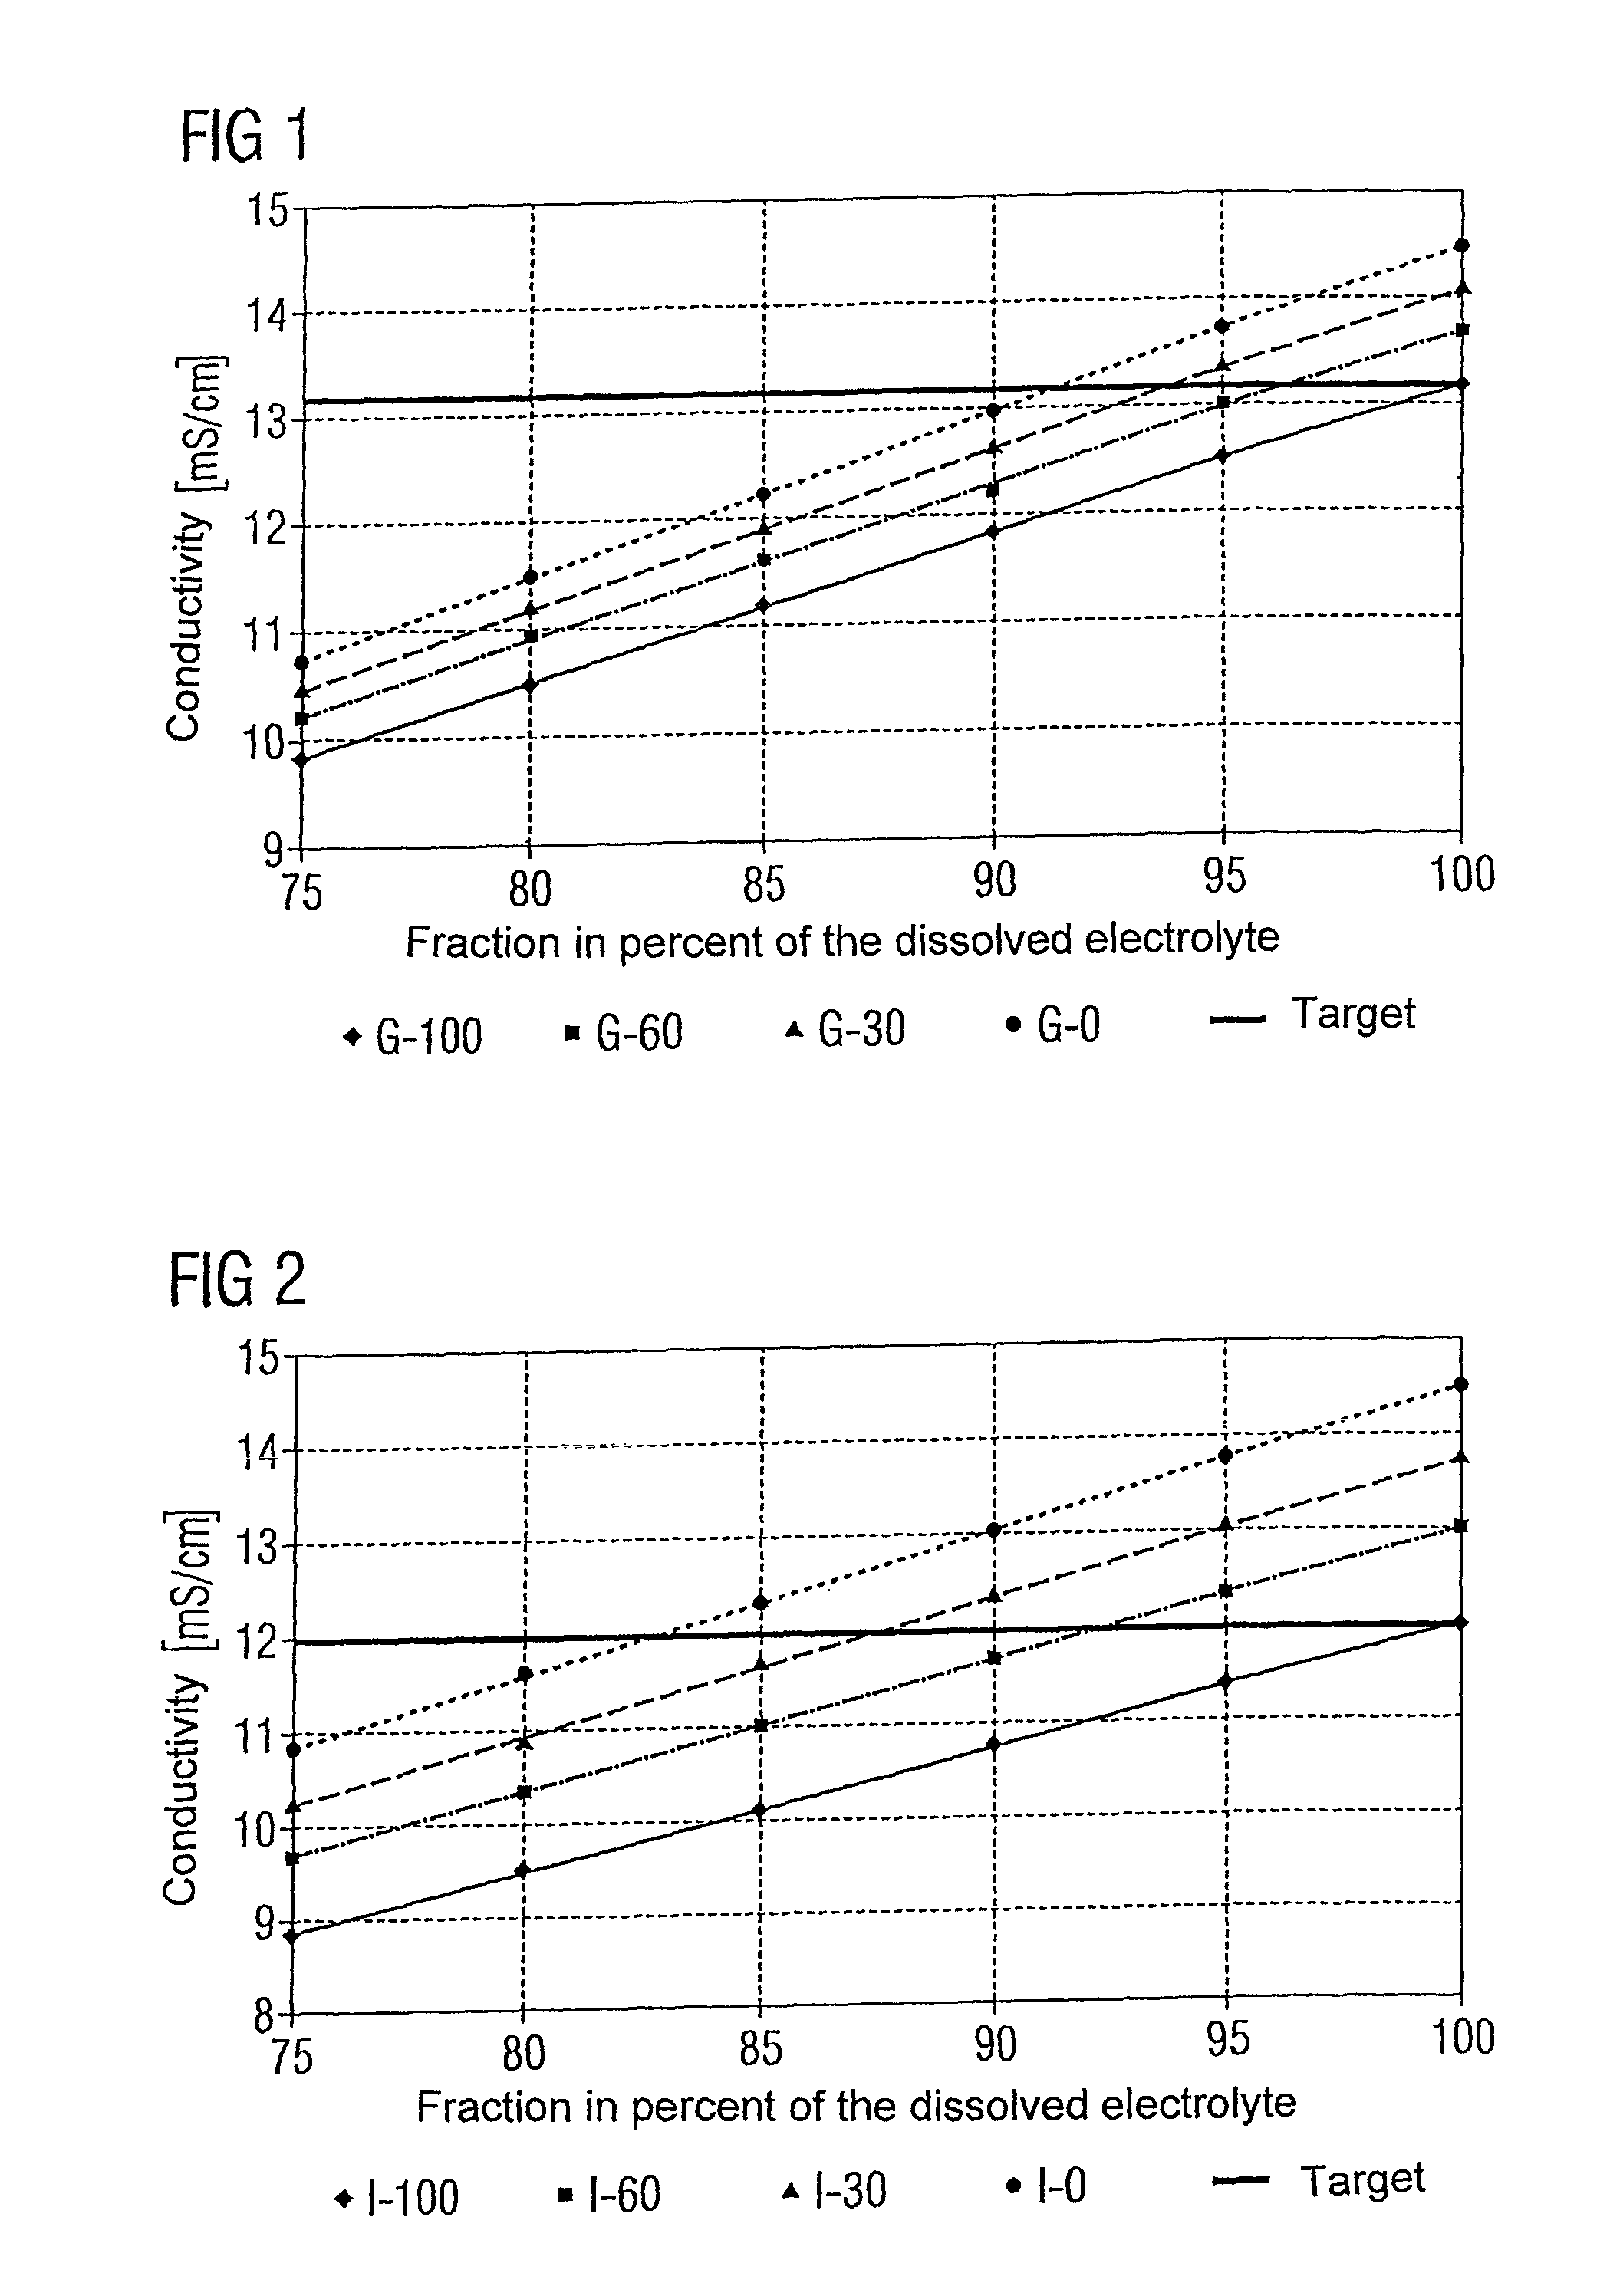 Method and apparatus for determining the composition of medical liquids with regard to their fraction of electrolytes and non-electrolytes